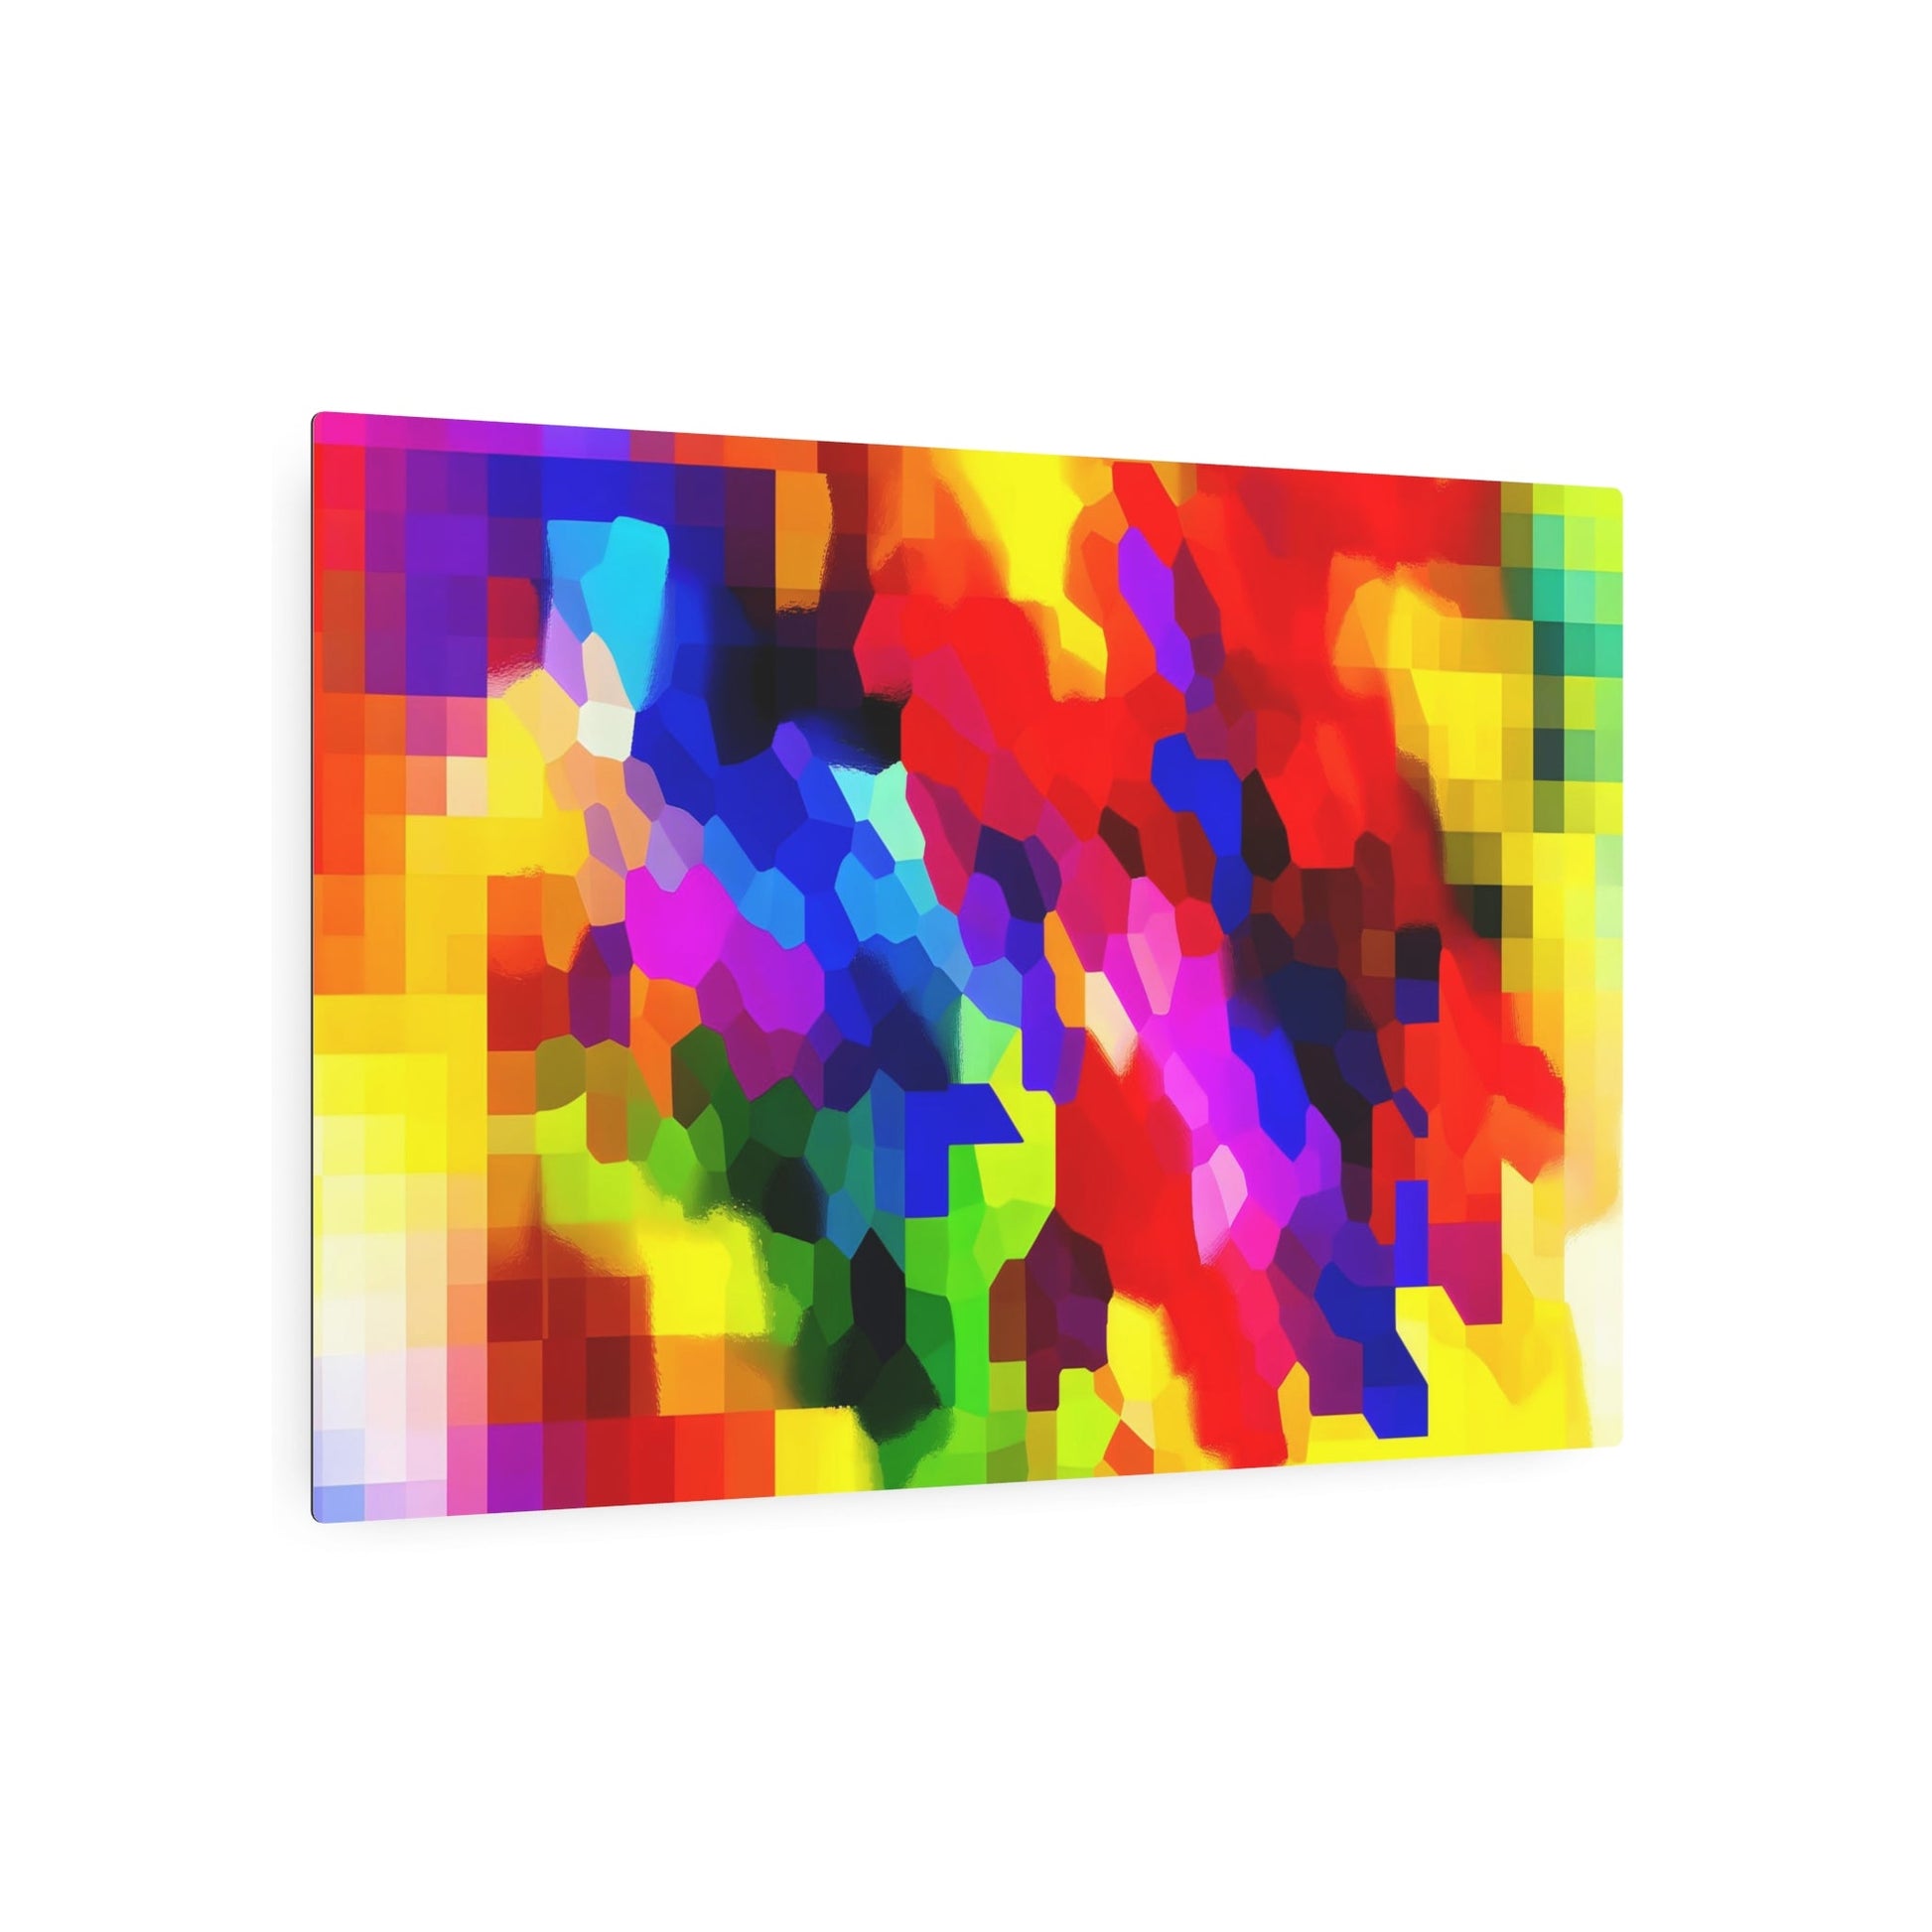 Metal Poster Art | "Modern Contemporary Digital Art: Vibrant Colored Abstract Shapes in Unique Modern Design Style" - Metal Poster Art 36″ x 24″ (Horizontal) 0.12''